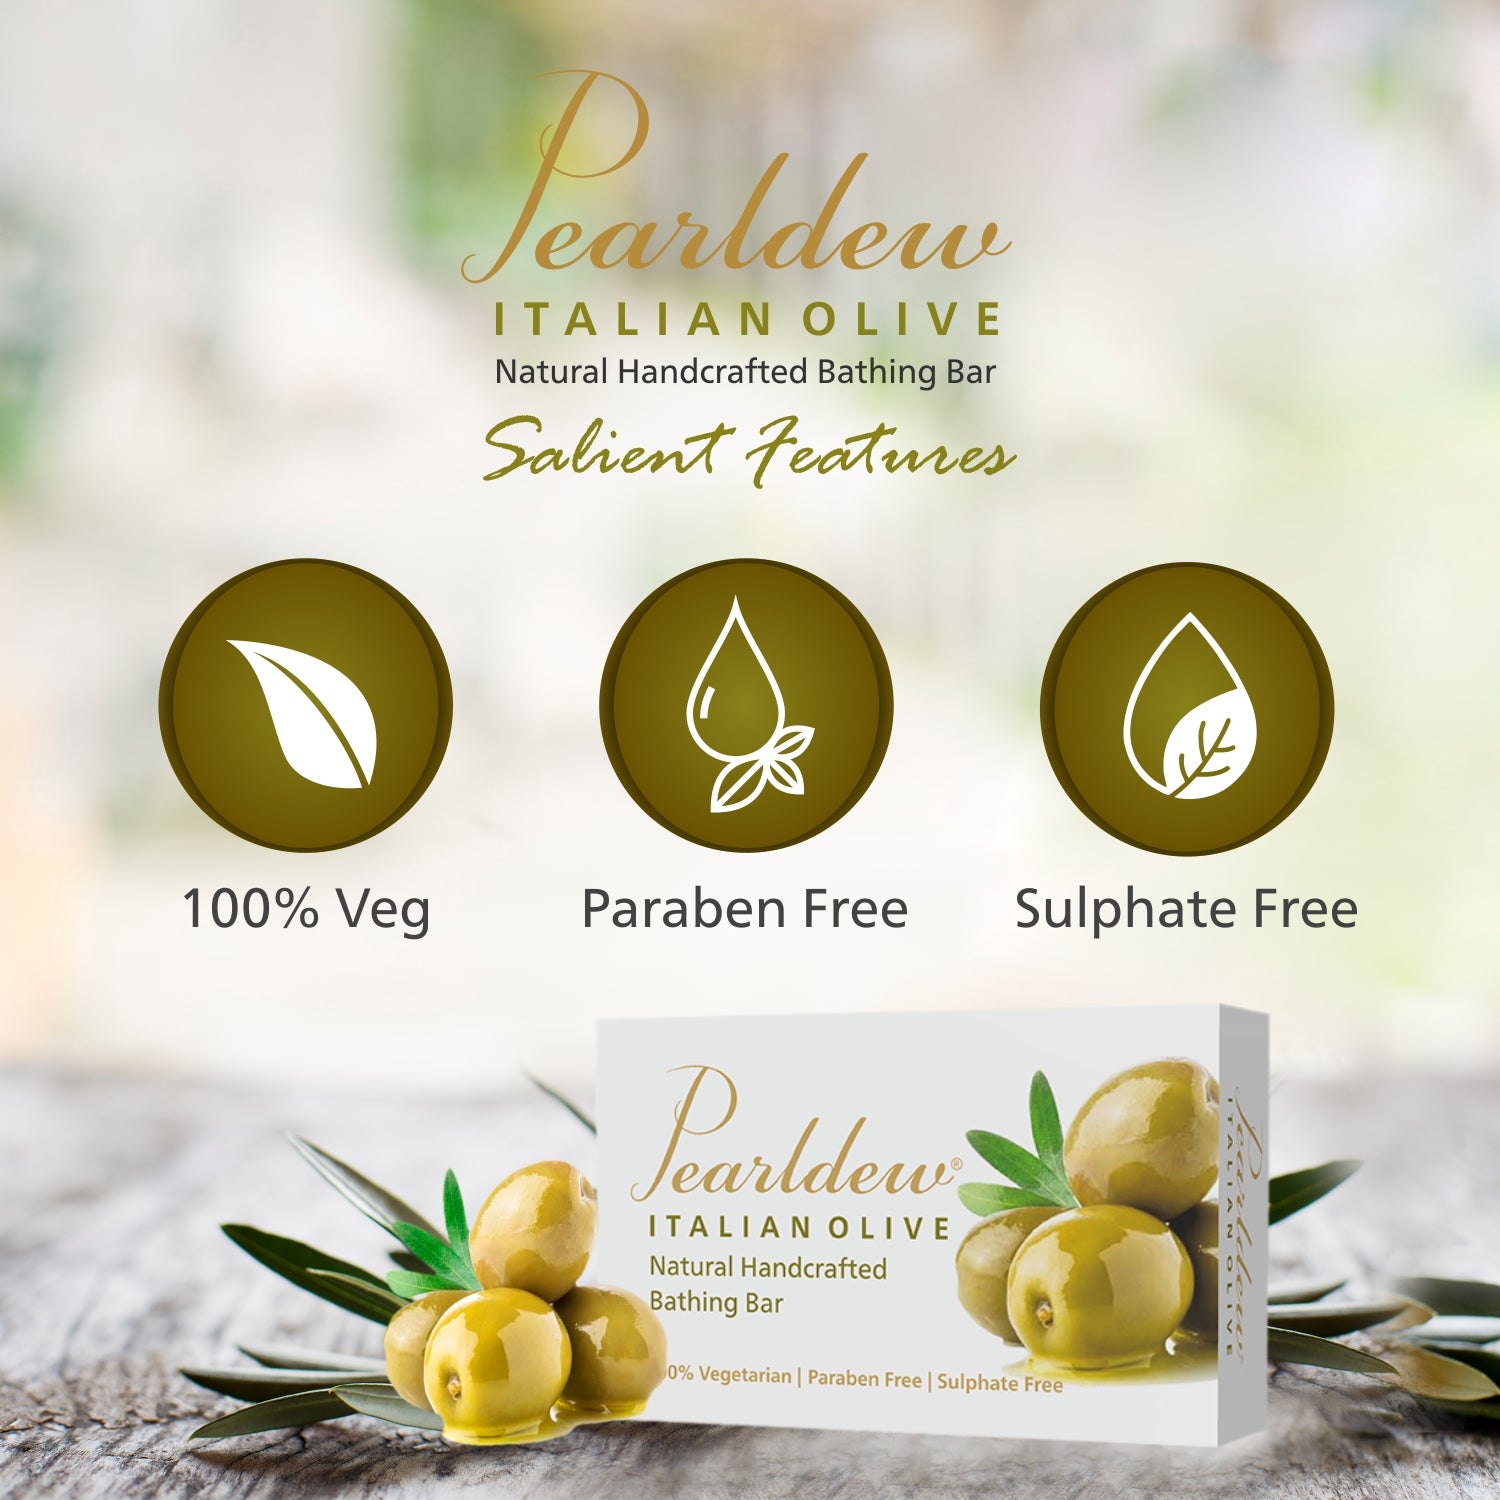 Pearldew Italian Olive Natural Handcrafted Bathing Bar (75 gm)